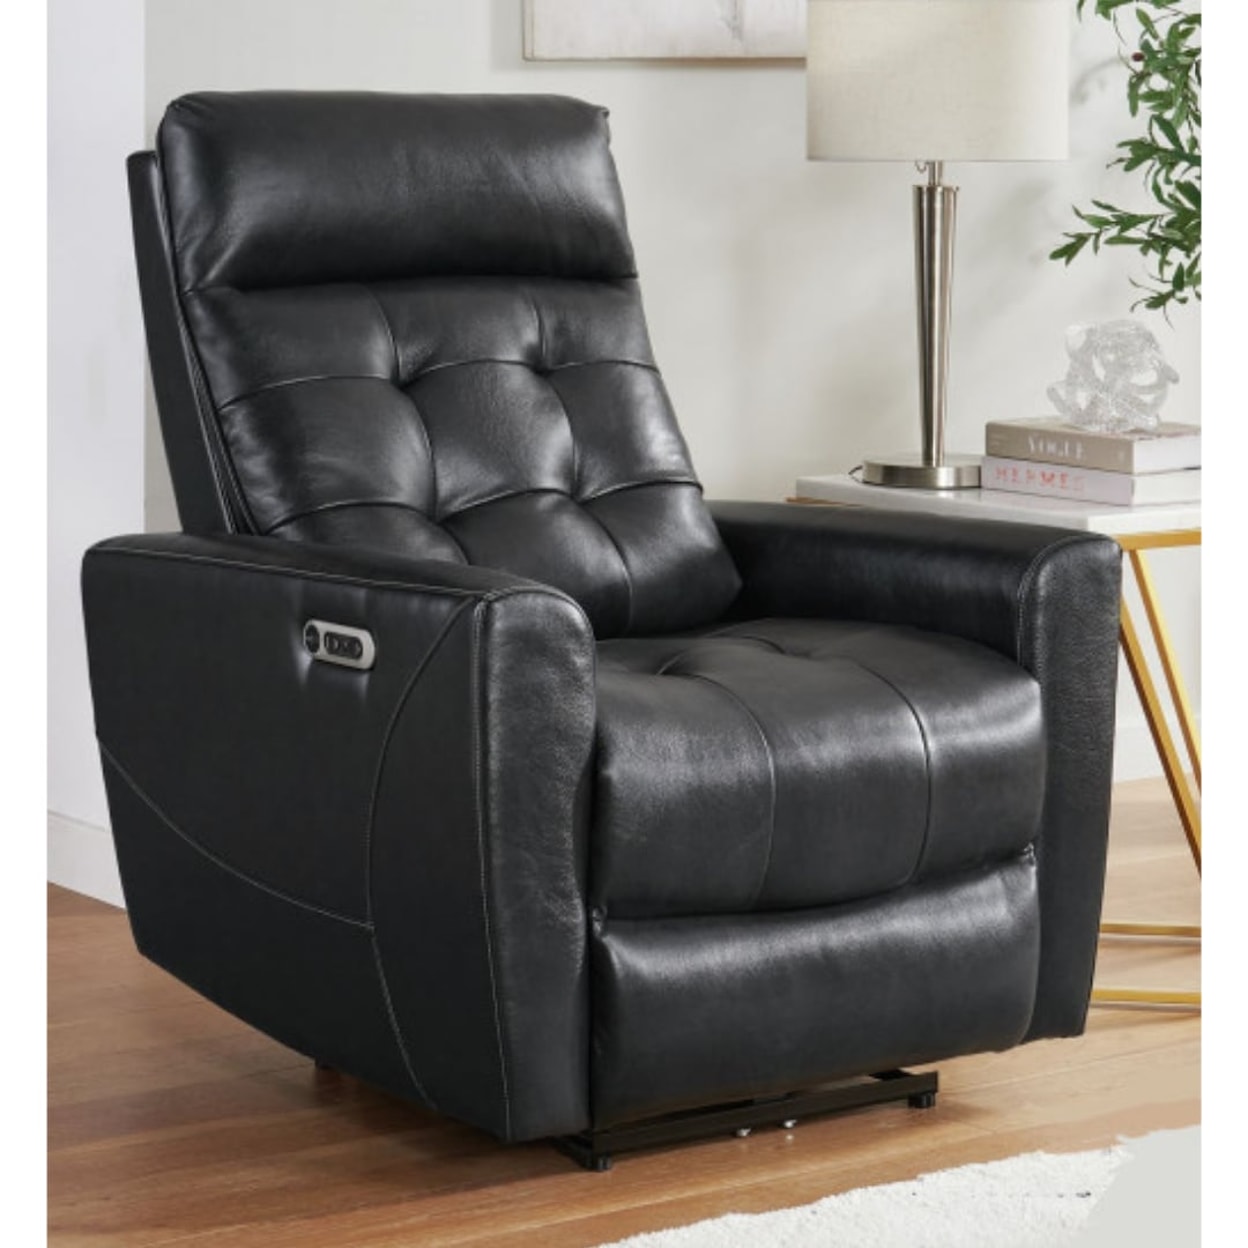 Elements International MVP Leather Recliners MVP LEATHER CHARCOAL DOUBLE POWER | RECLINER